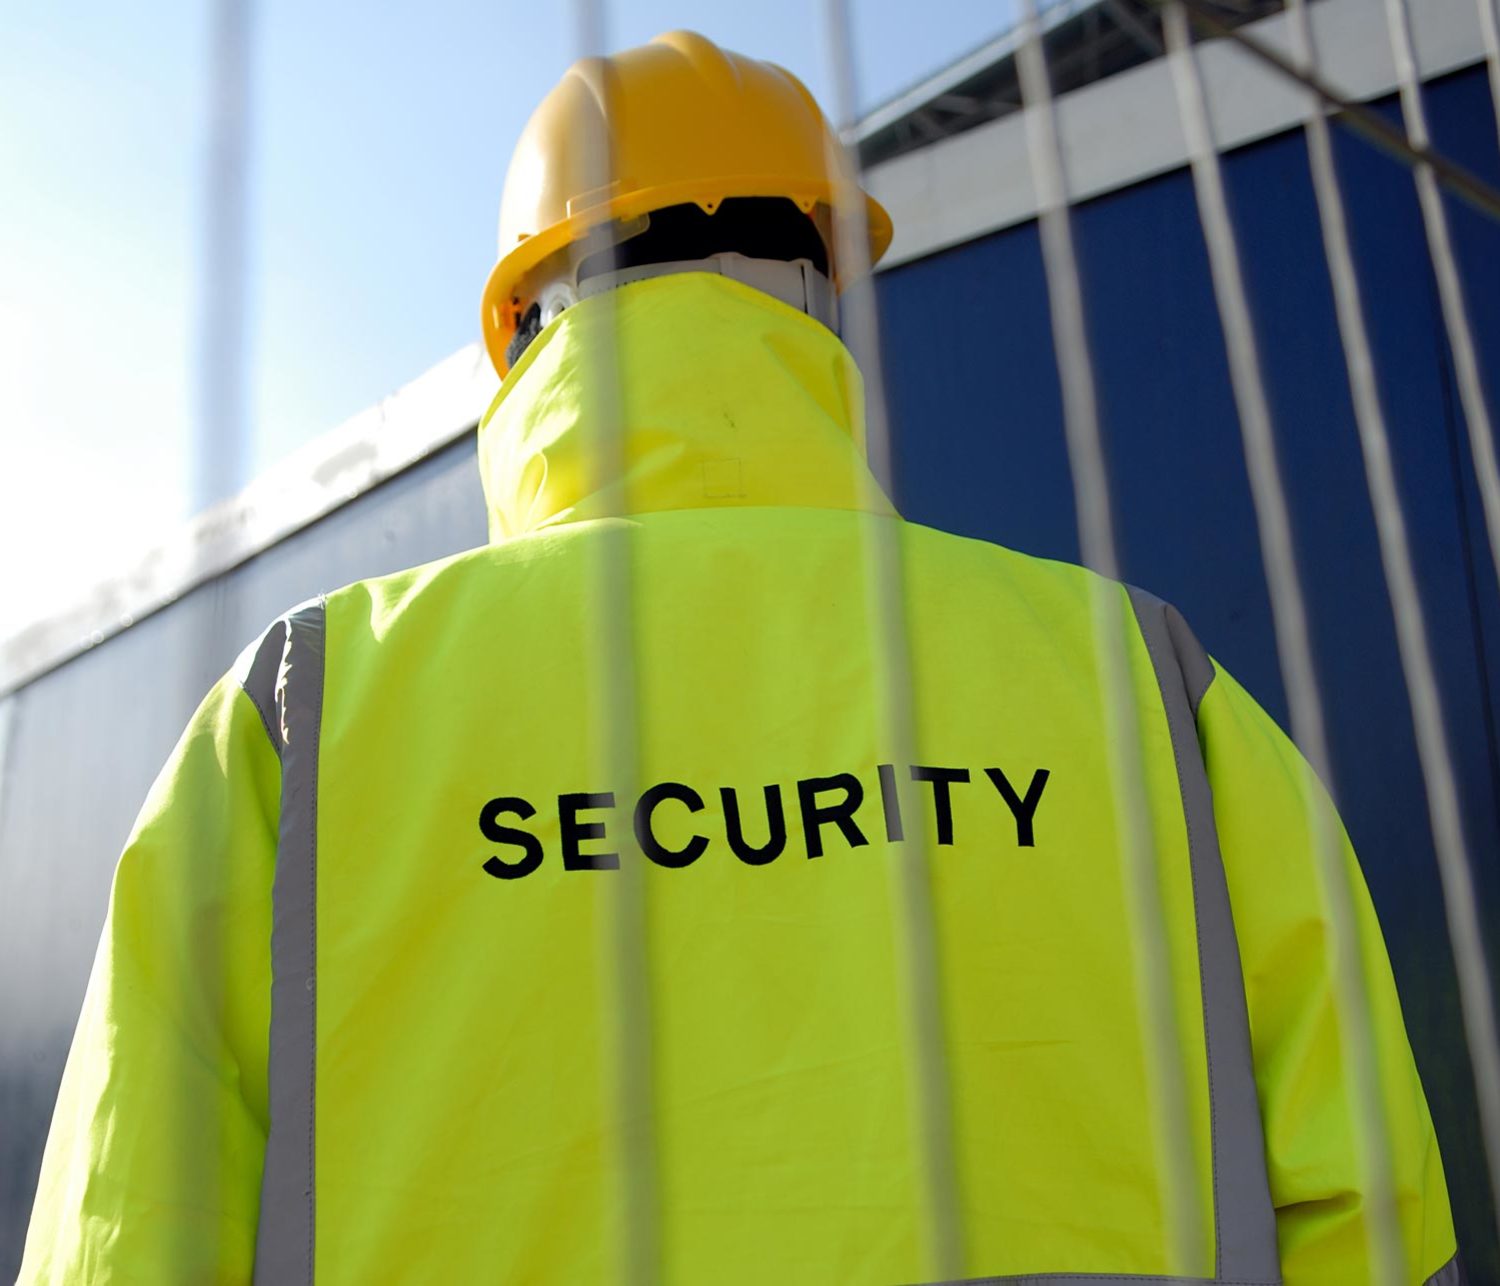 A security worker